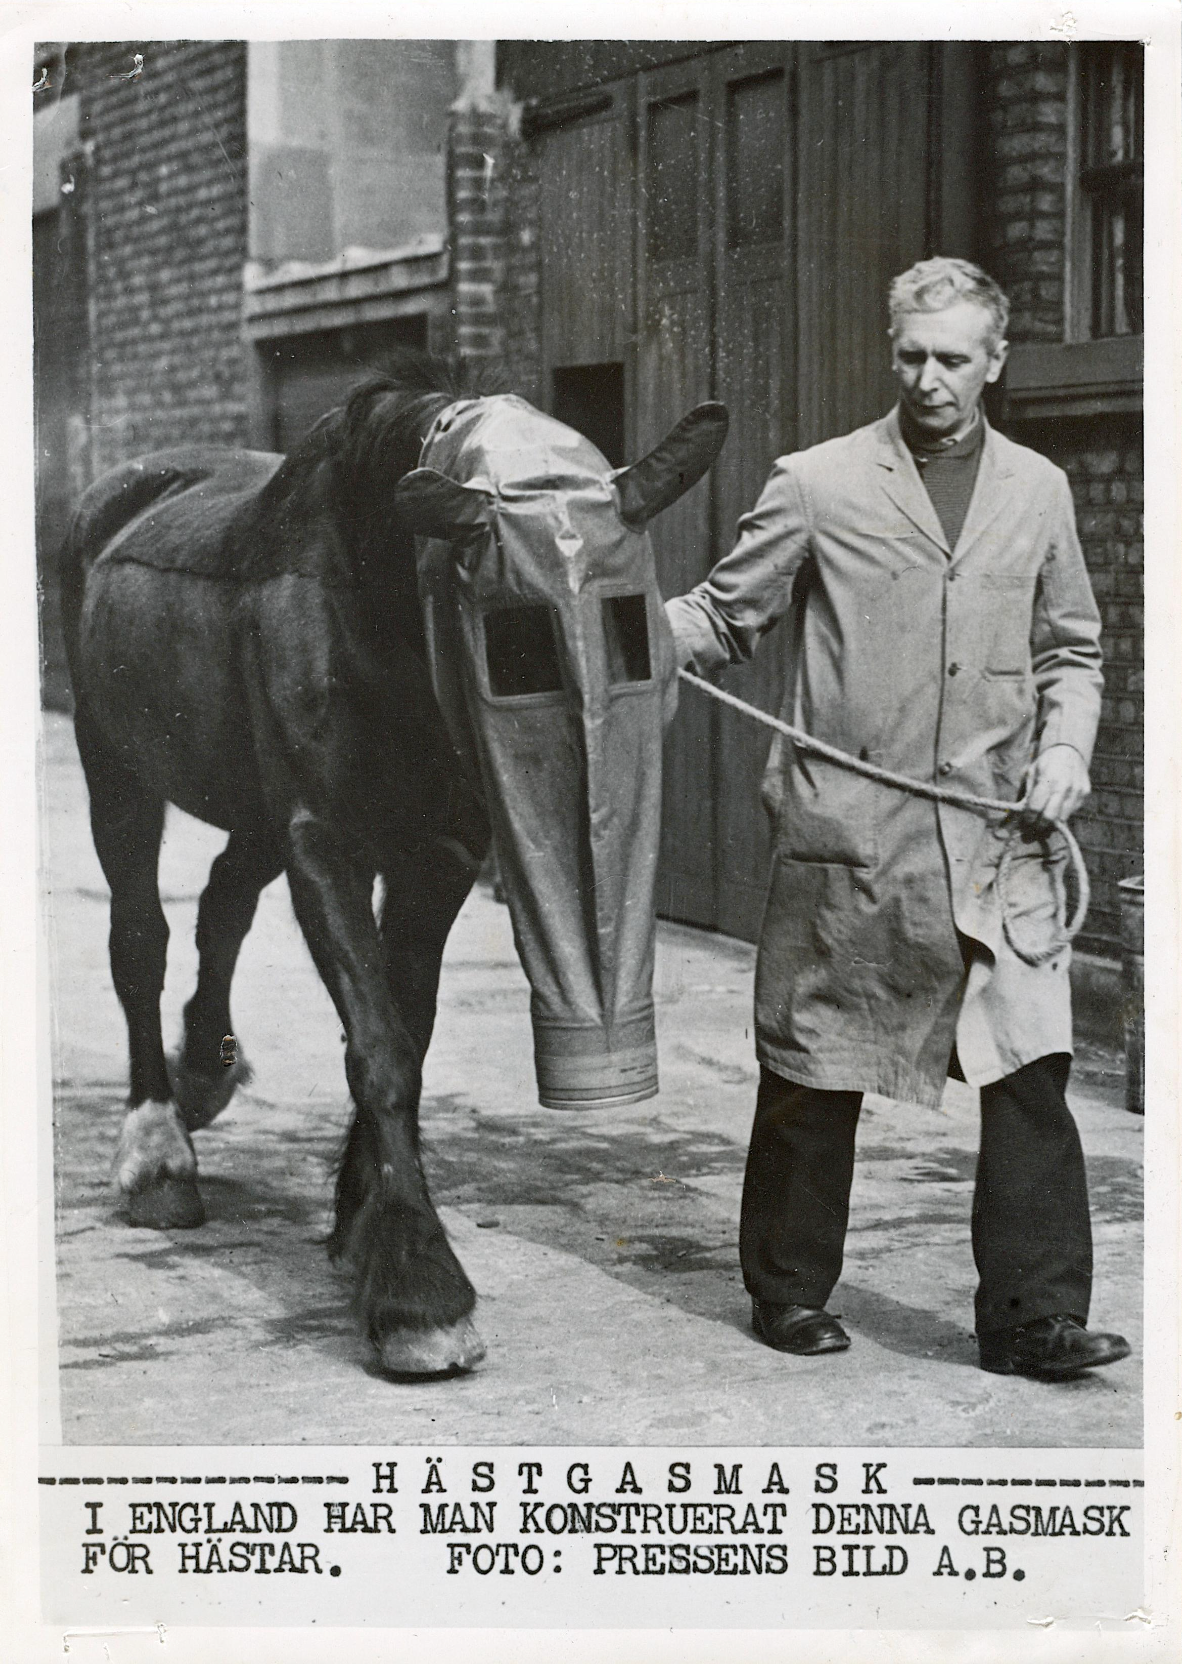 “In England, this gas mask has been designed for horses”, Sweden, ca. 1940